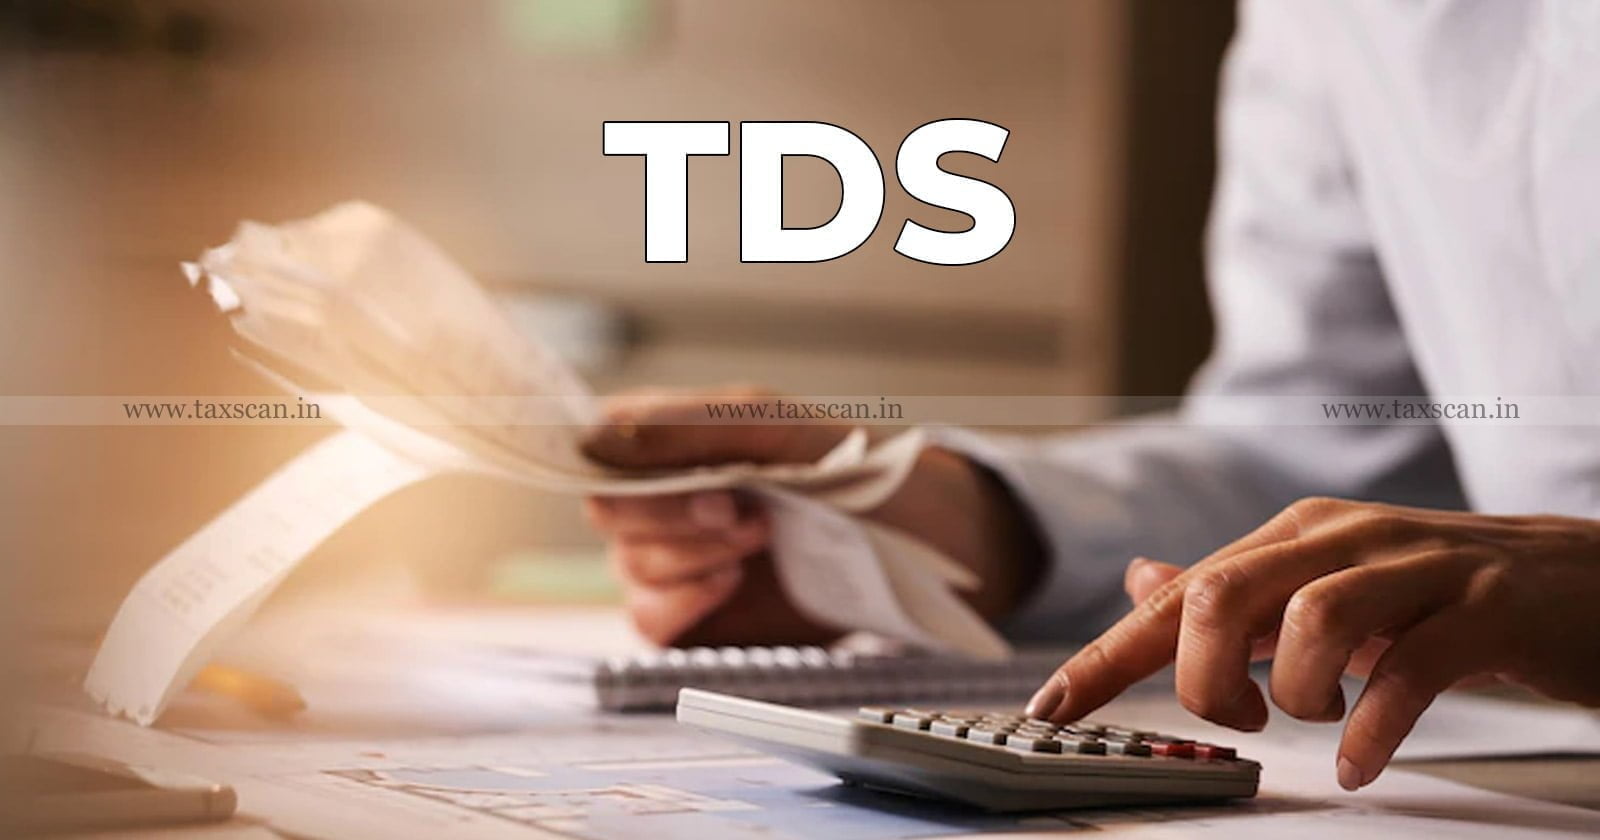 TDS-Deduction - Unsecured-Loan-Calcutta-HC - Income- Tax-Act - TAXSCAN